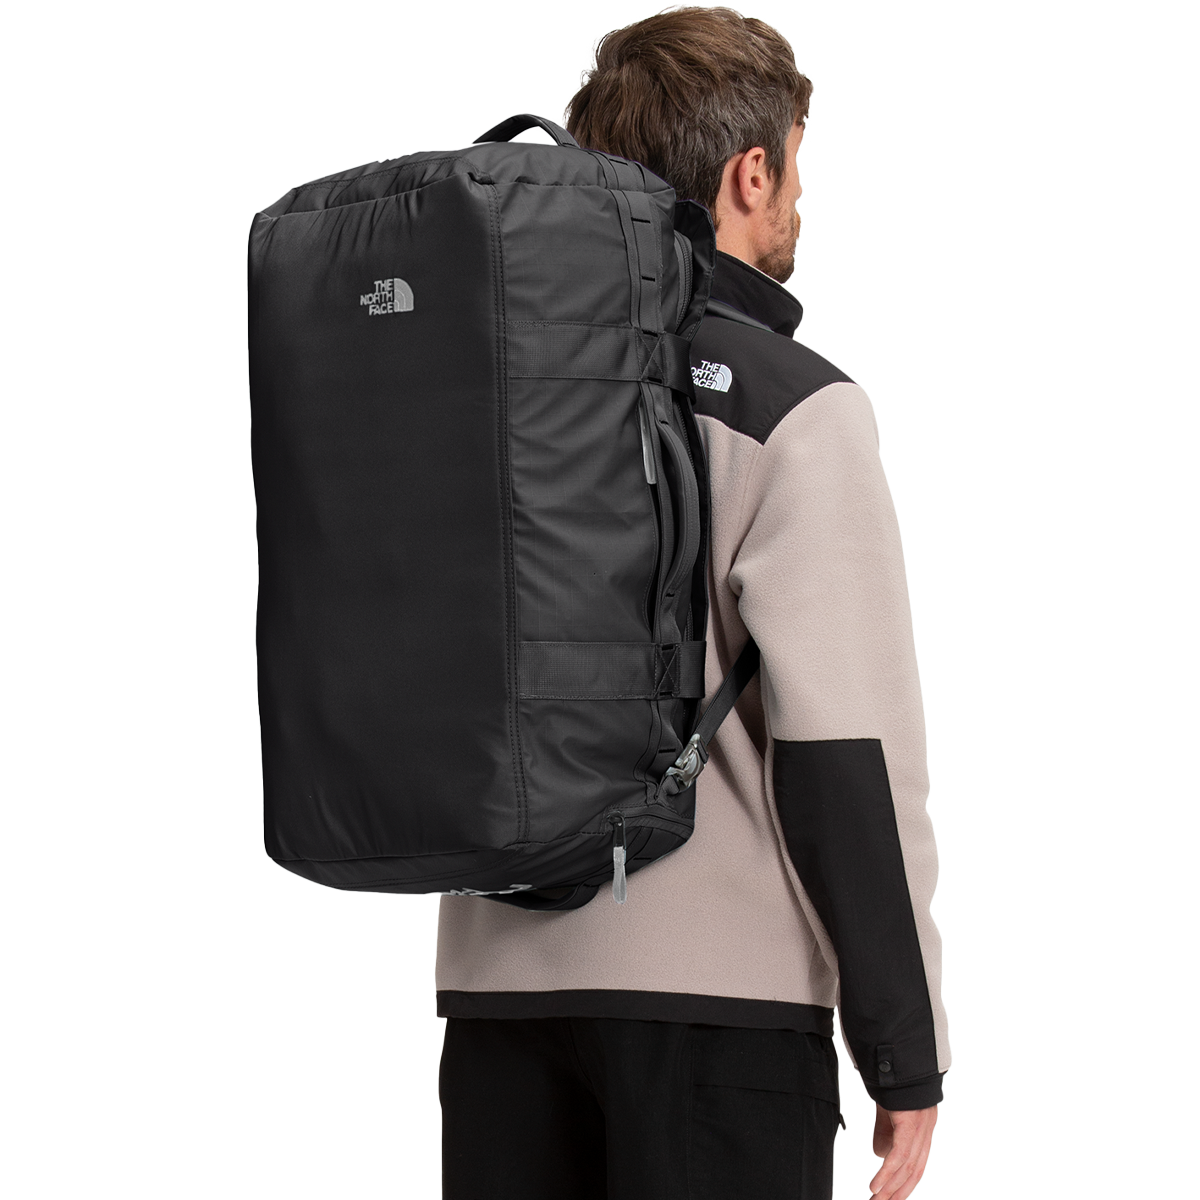 The North Face Base Camp Voyager Duffel 62L